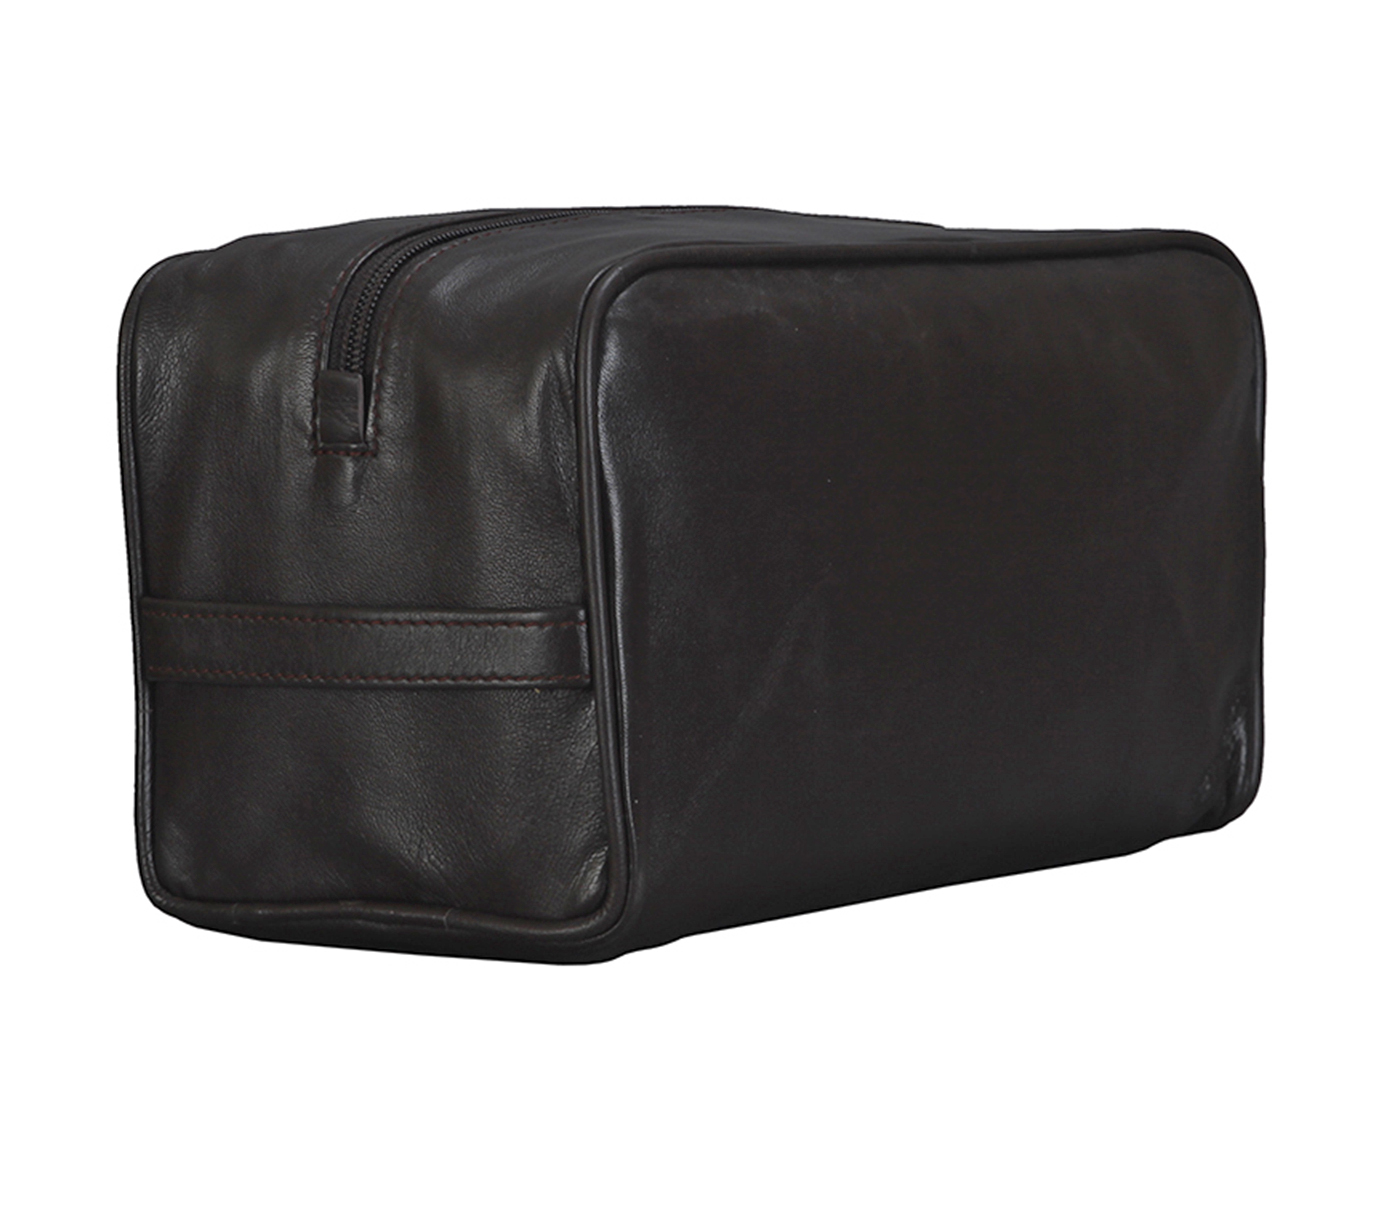 Travel Essential--Unisex Wash & Toiletry travel Bag in Genuine Leather - Brown